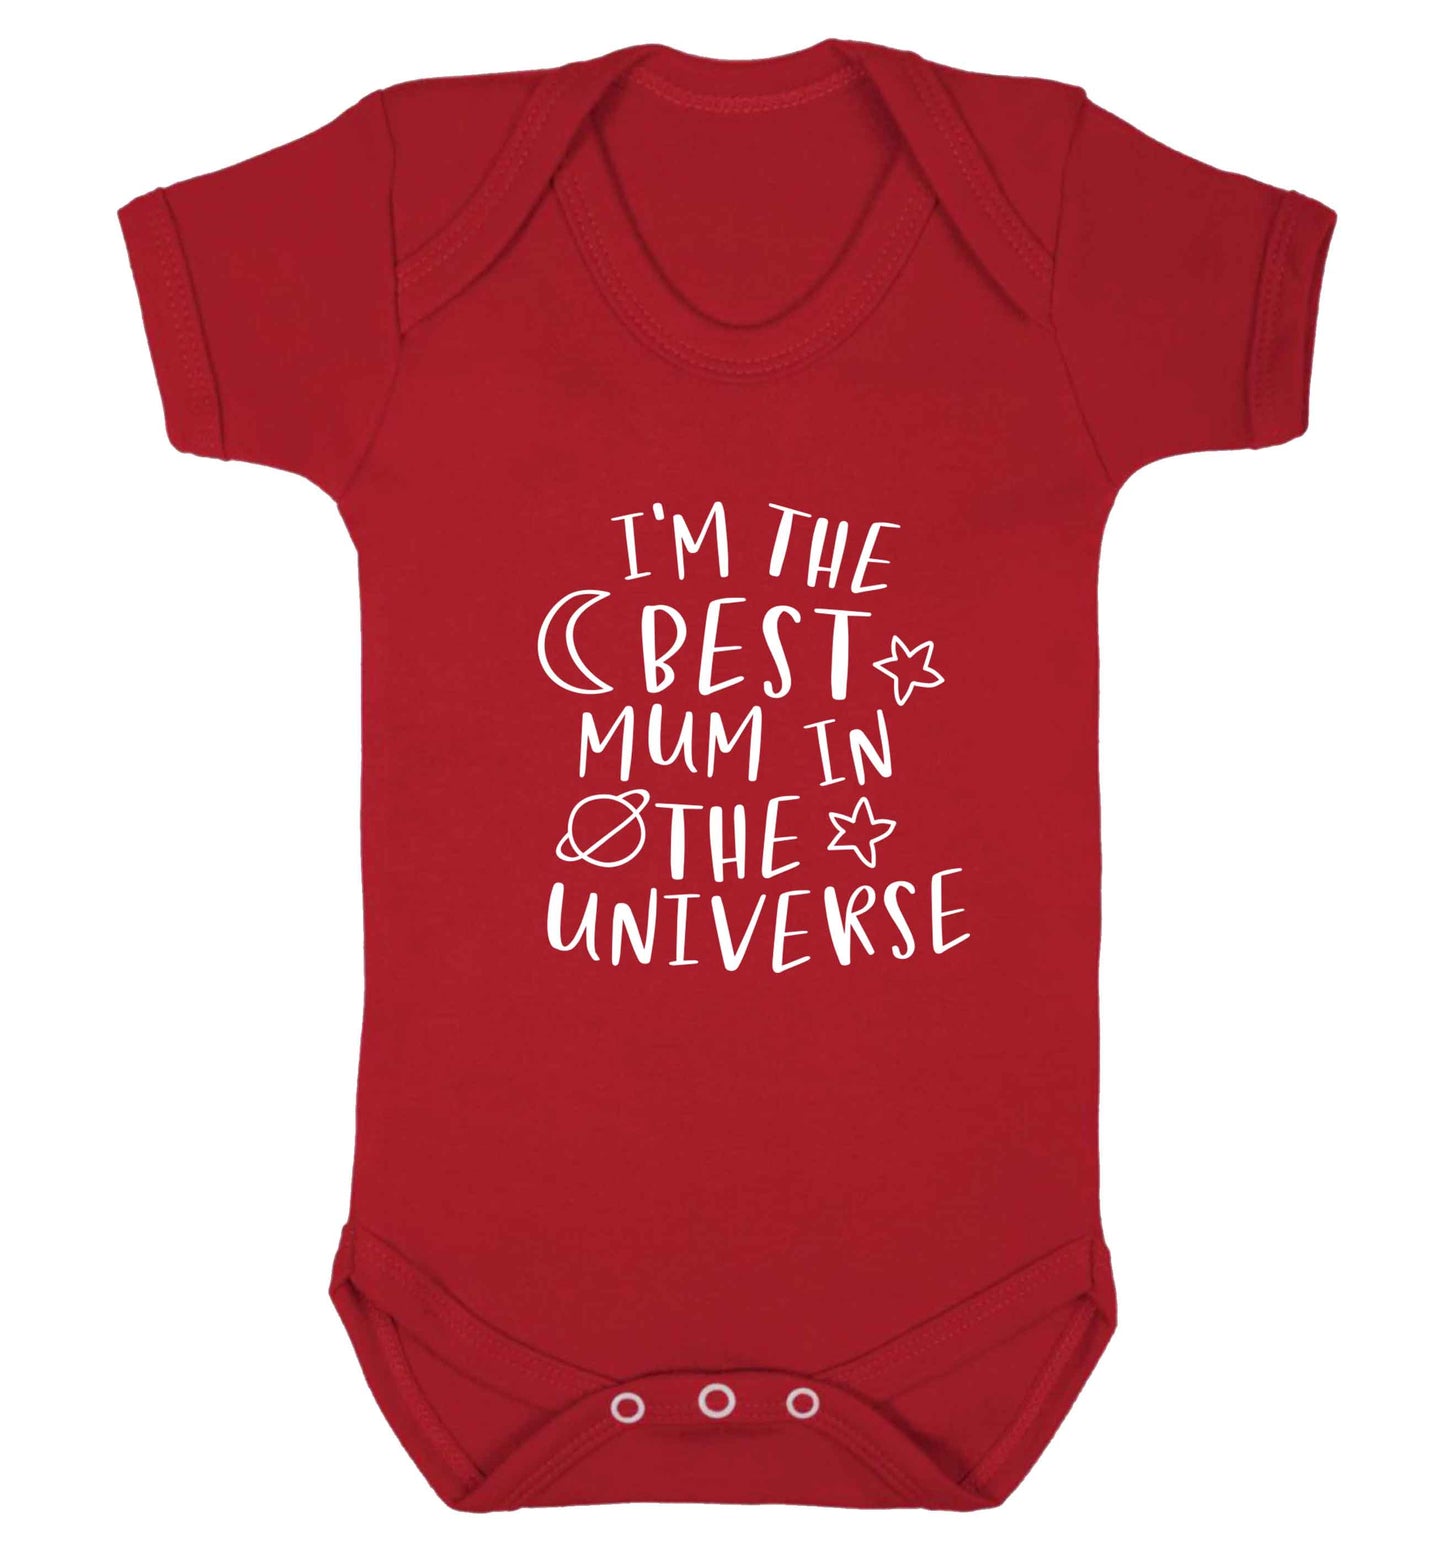 I'm the best mum in the universe baby vest red 18-24 months